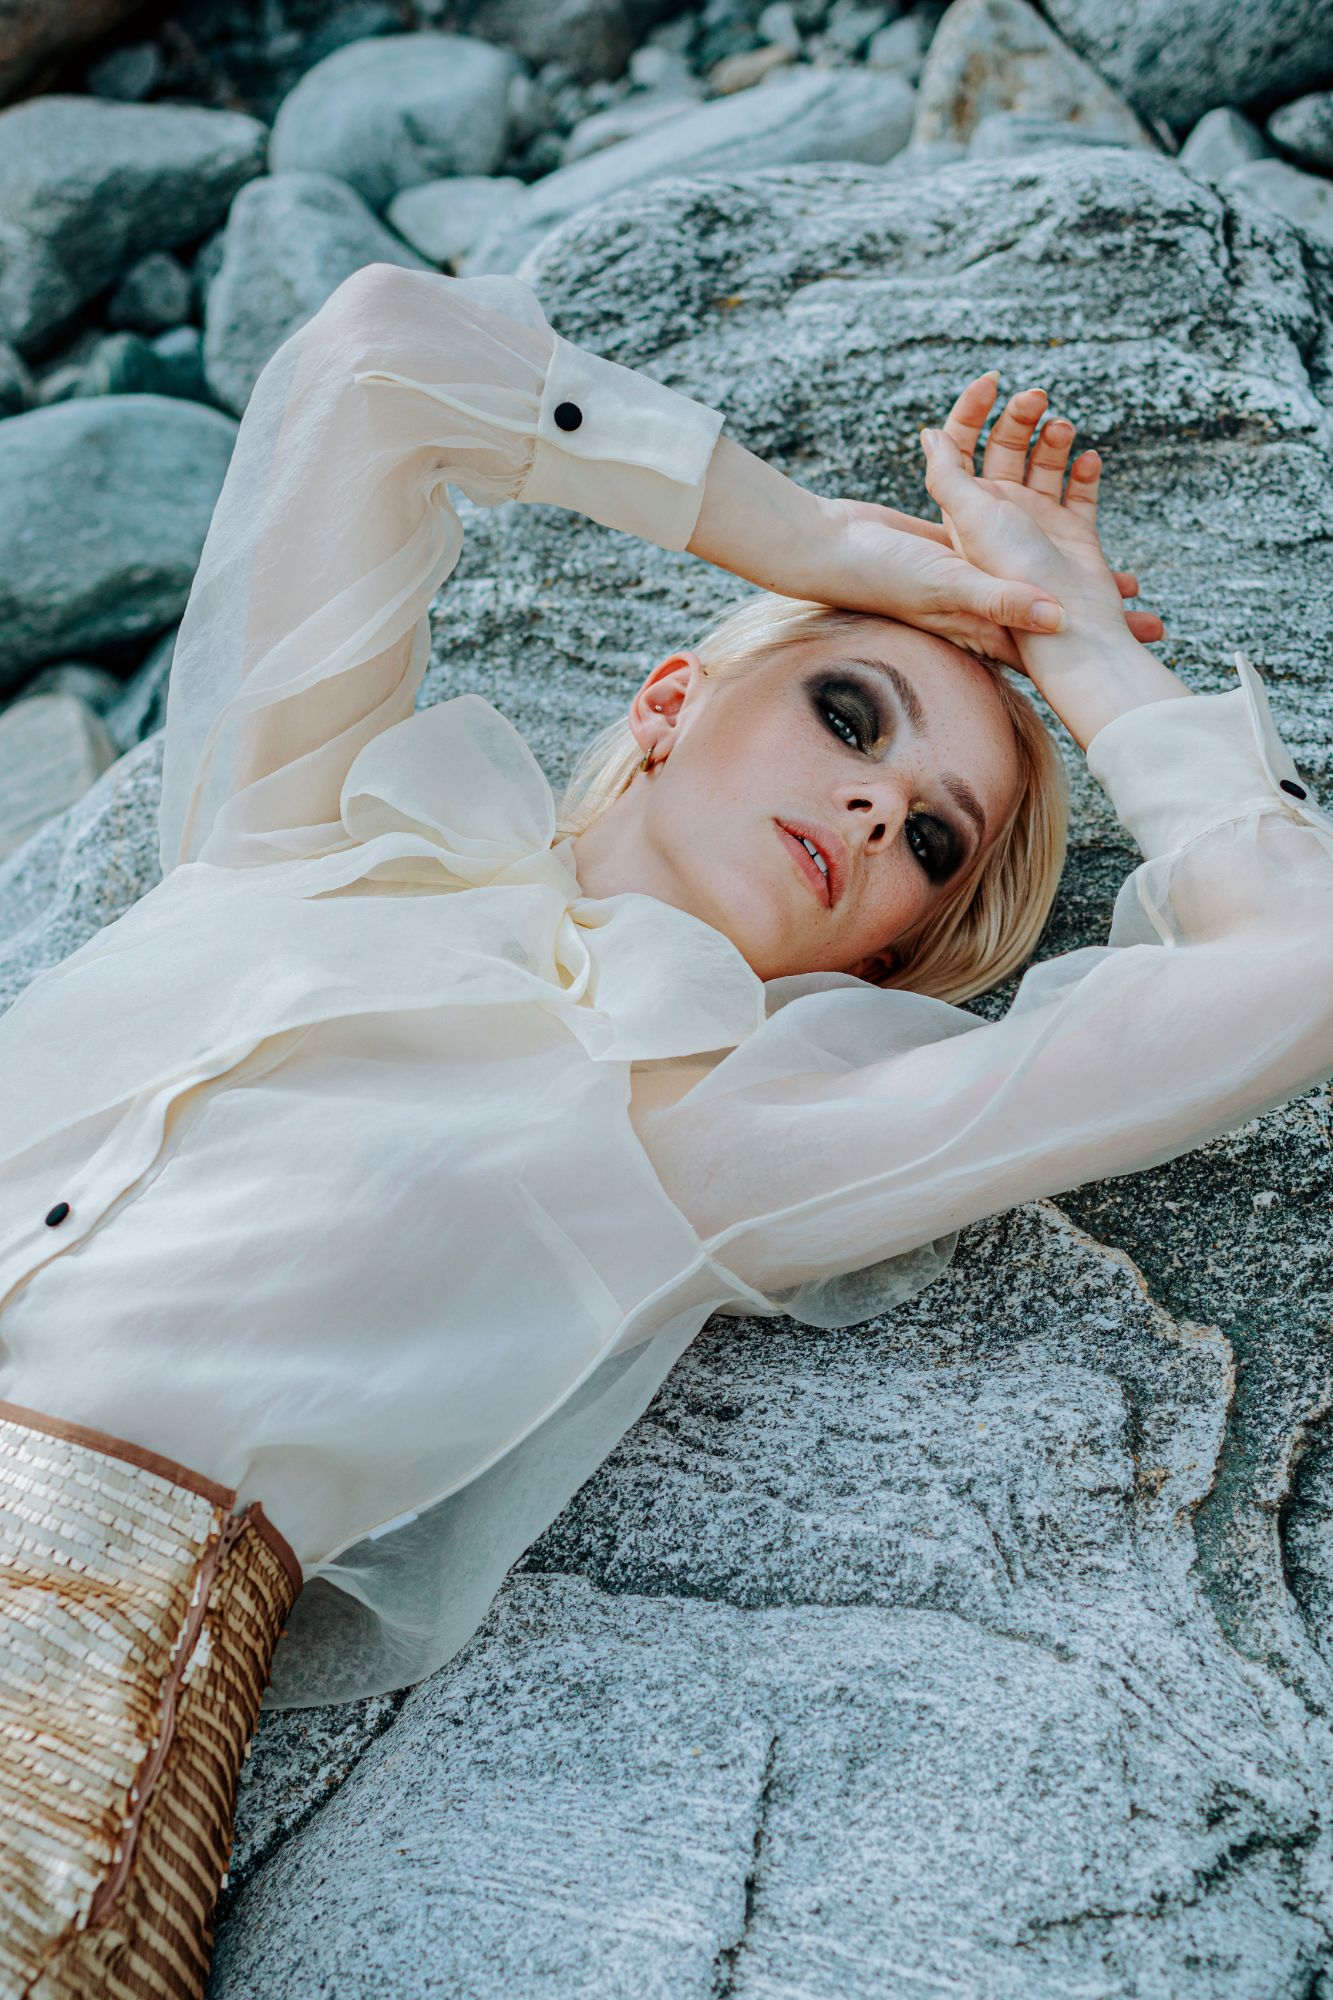 blonde girl with dark eye makeup; golden skirt, laying on stone outside